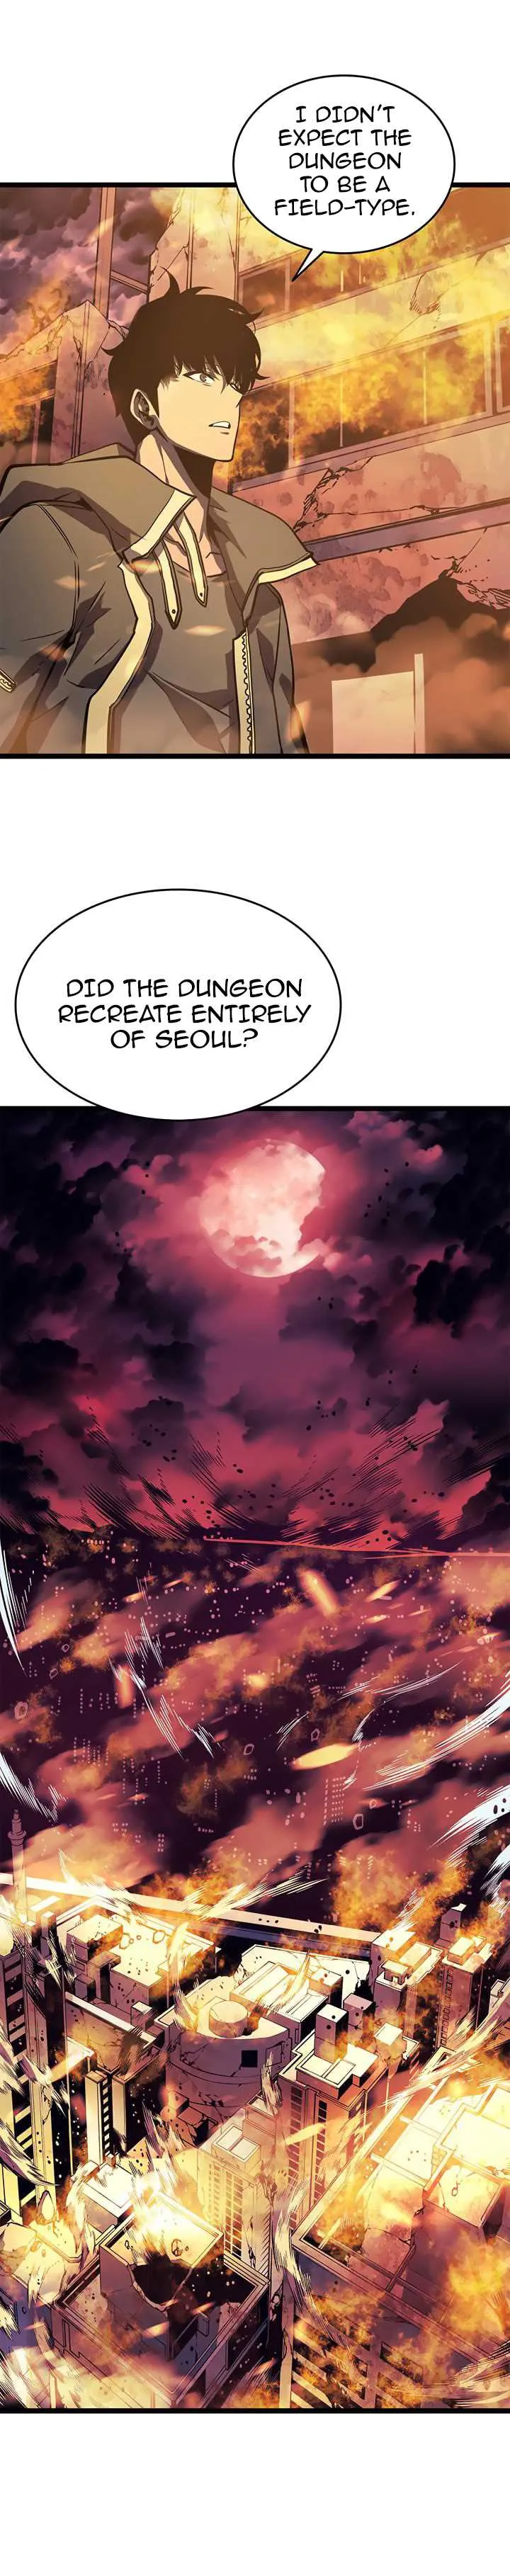 Solo leveling Chapter 057 11